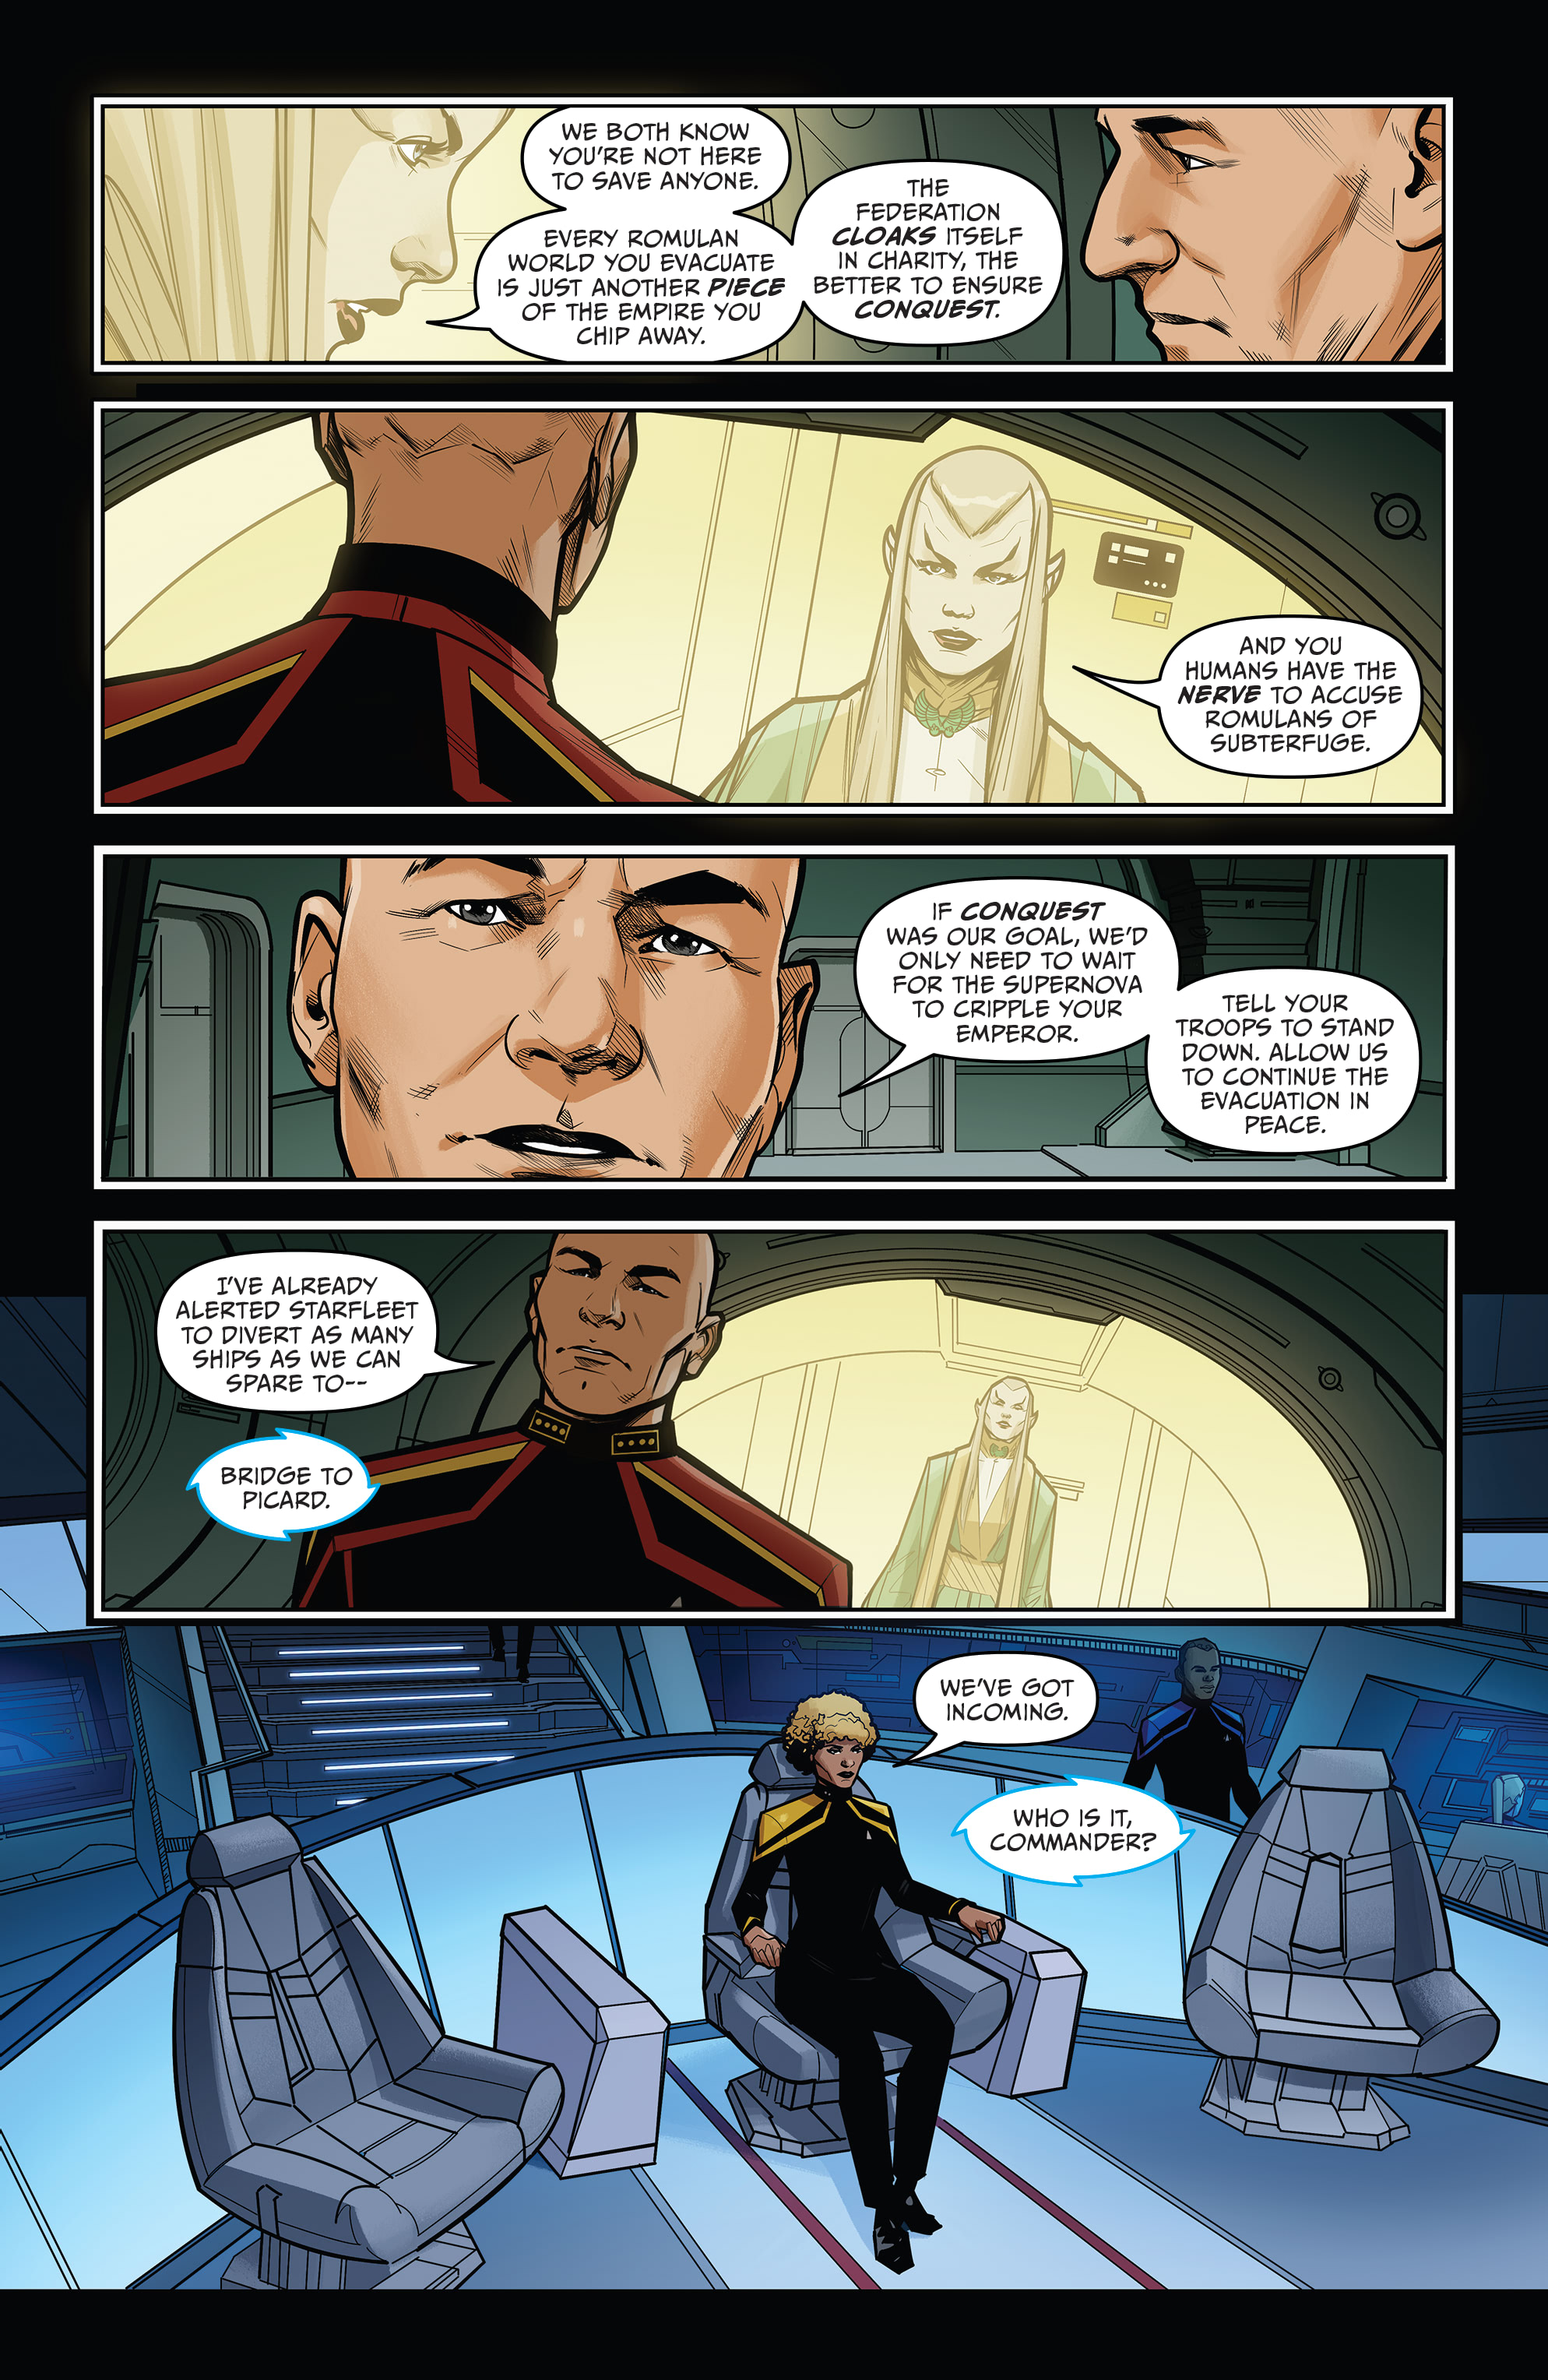 Star Trek: Picard—Countdown (2019-): Chapter 3 - Page 12